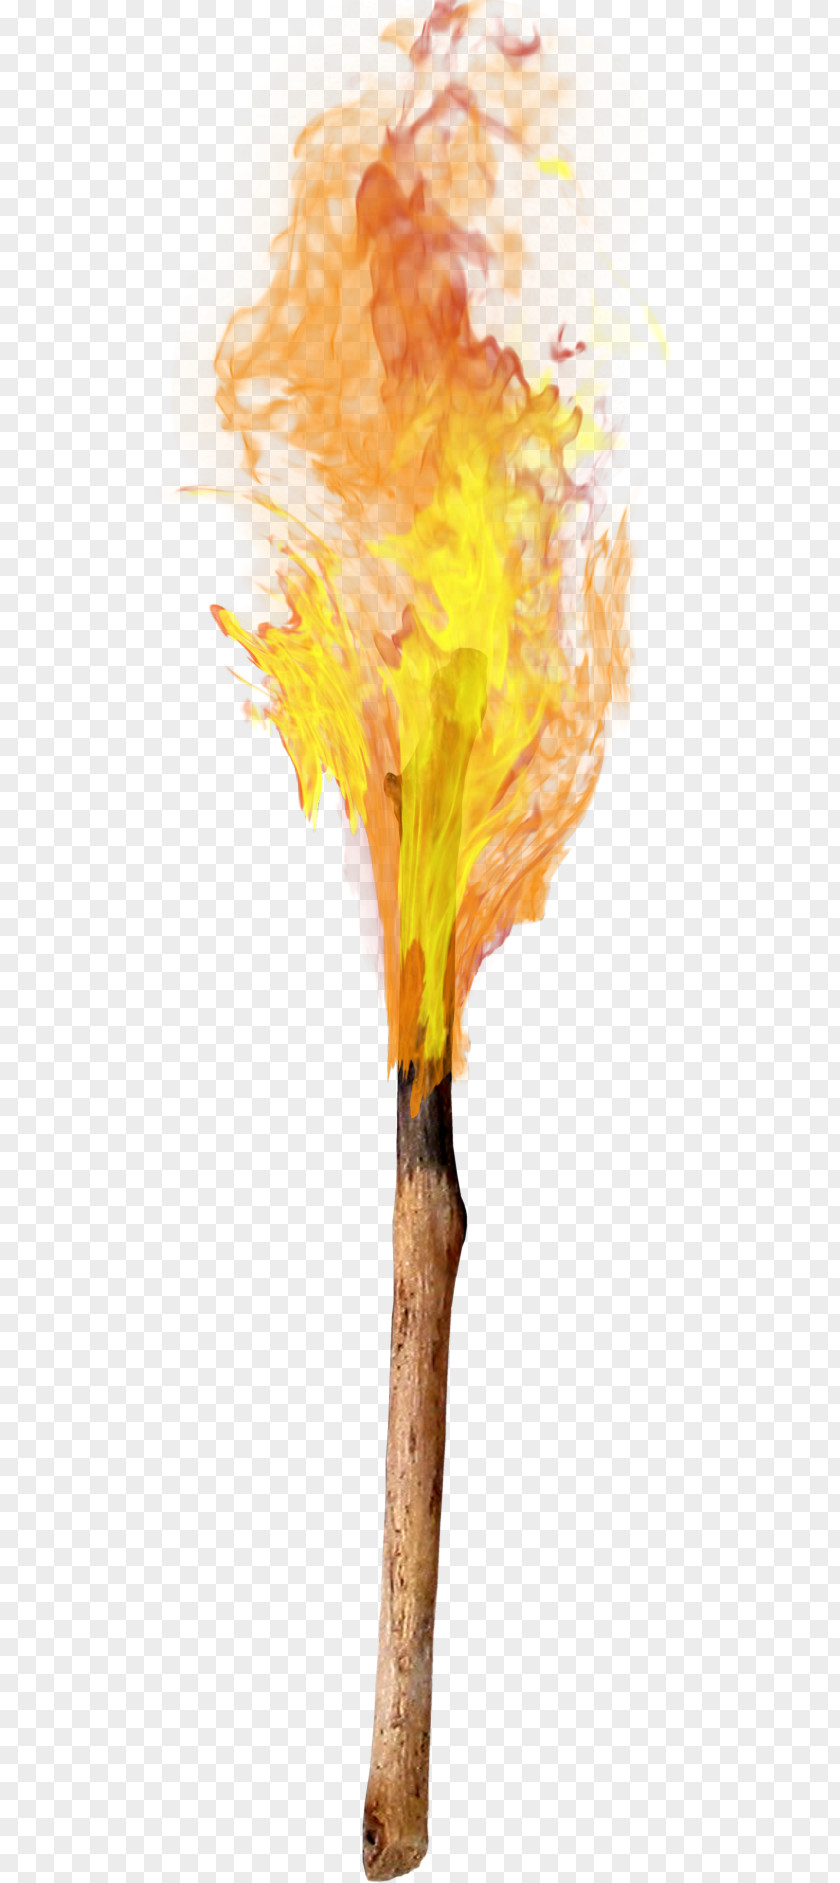 Flame Torch Combustion PNG